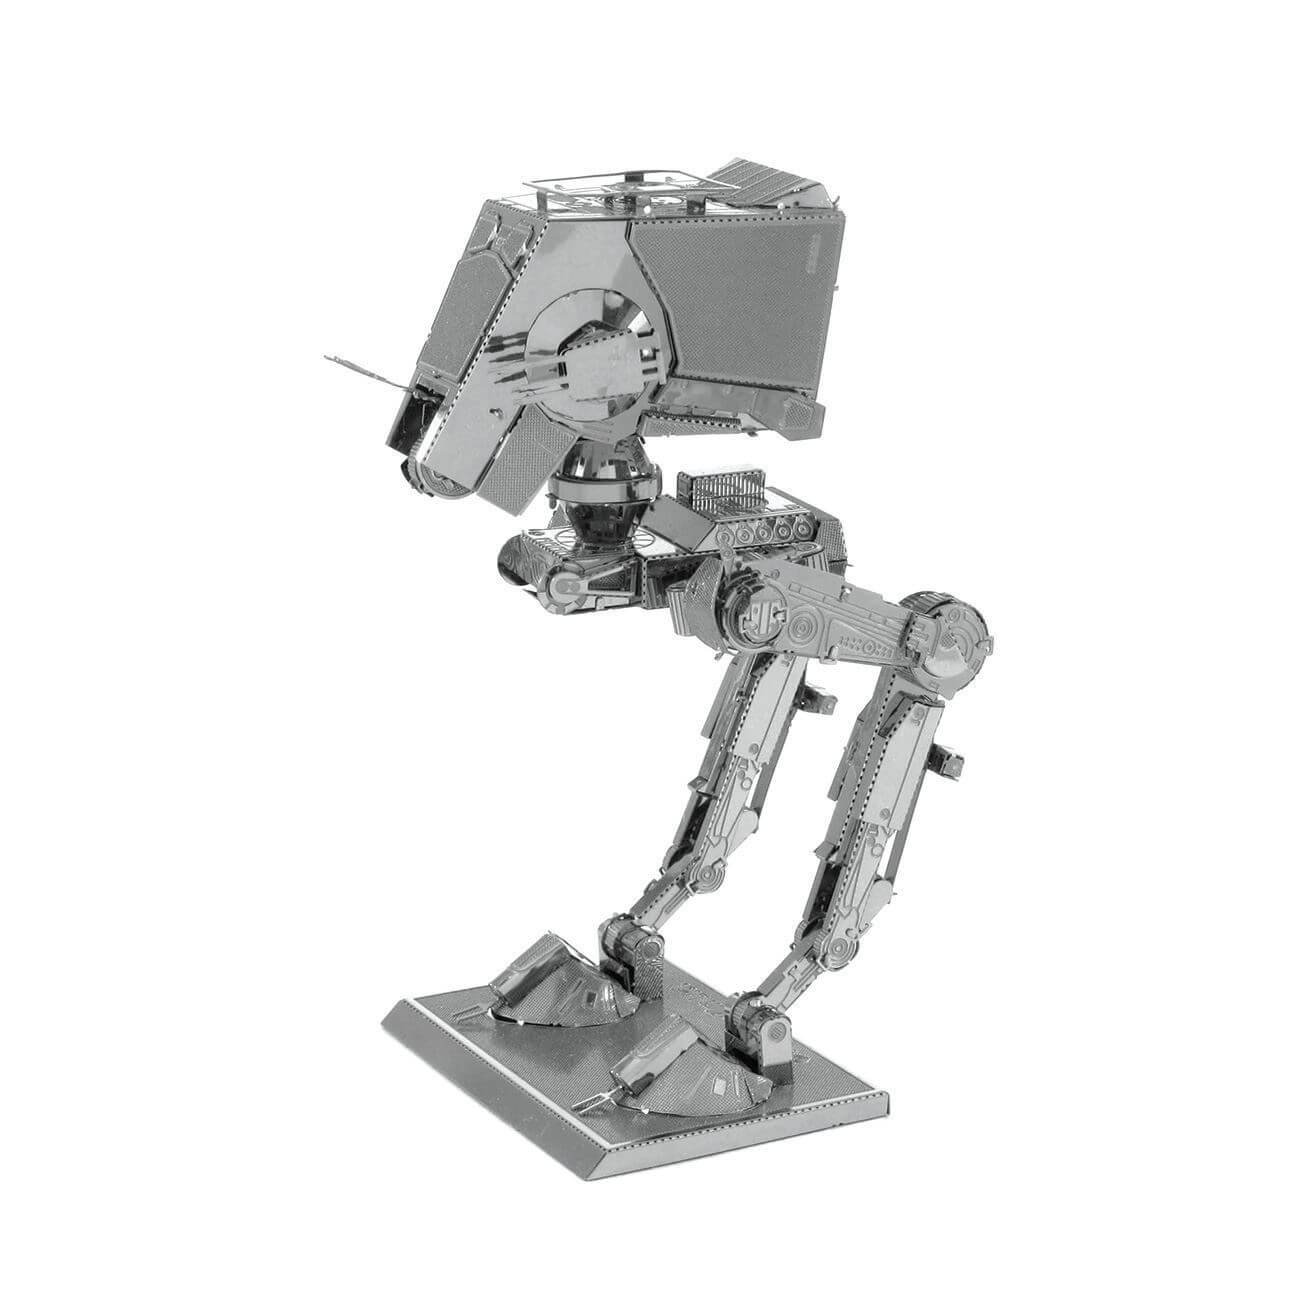 Side view of the Metal Earth Star Wars AT-ST Metal Model Kit - 2 Sheets.